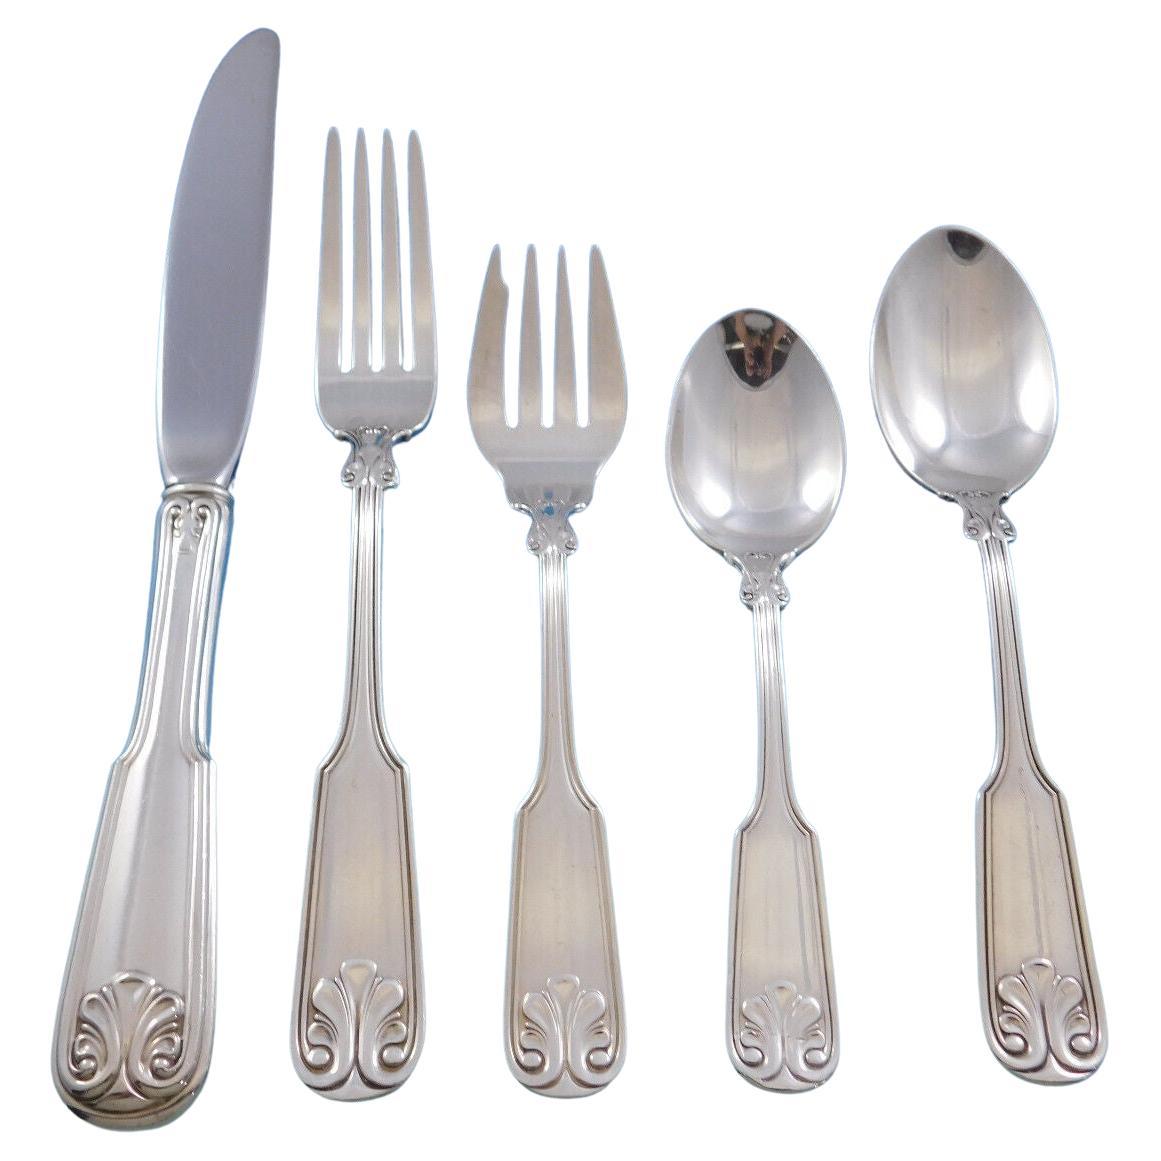 Shell Aka Hampton by Gorham Sterling Silver Flatware Set for 12 Service 60 Pcs For Sale